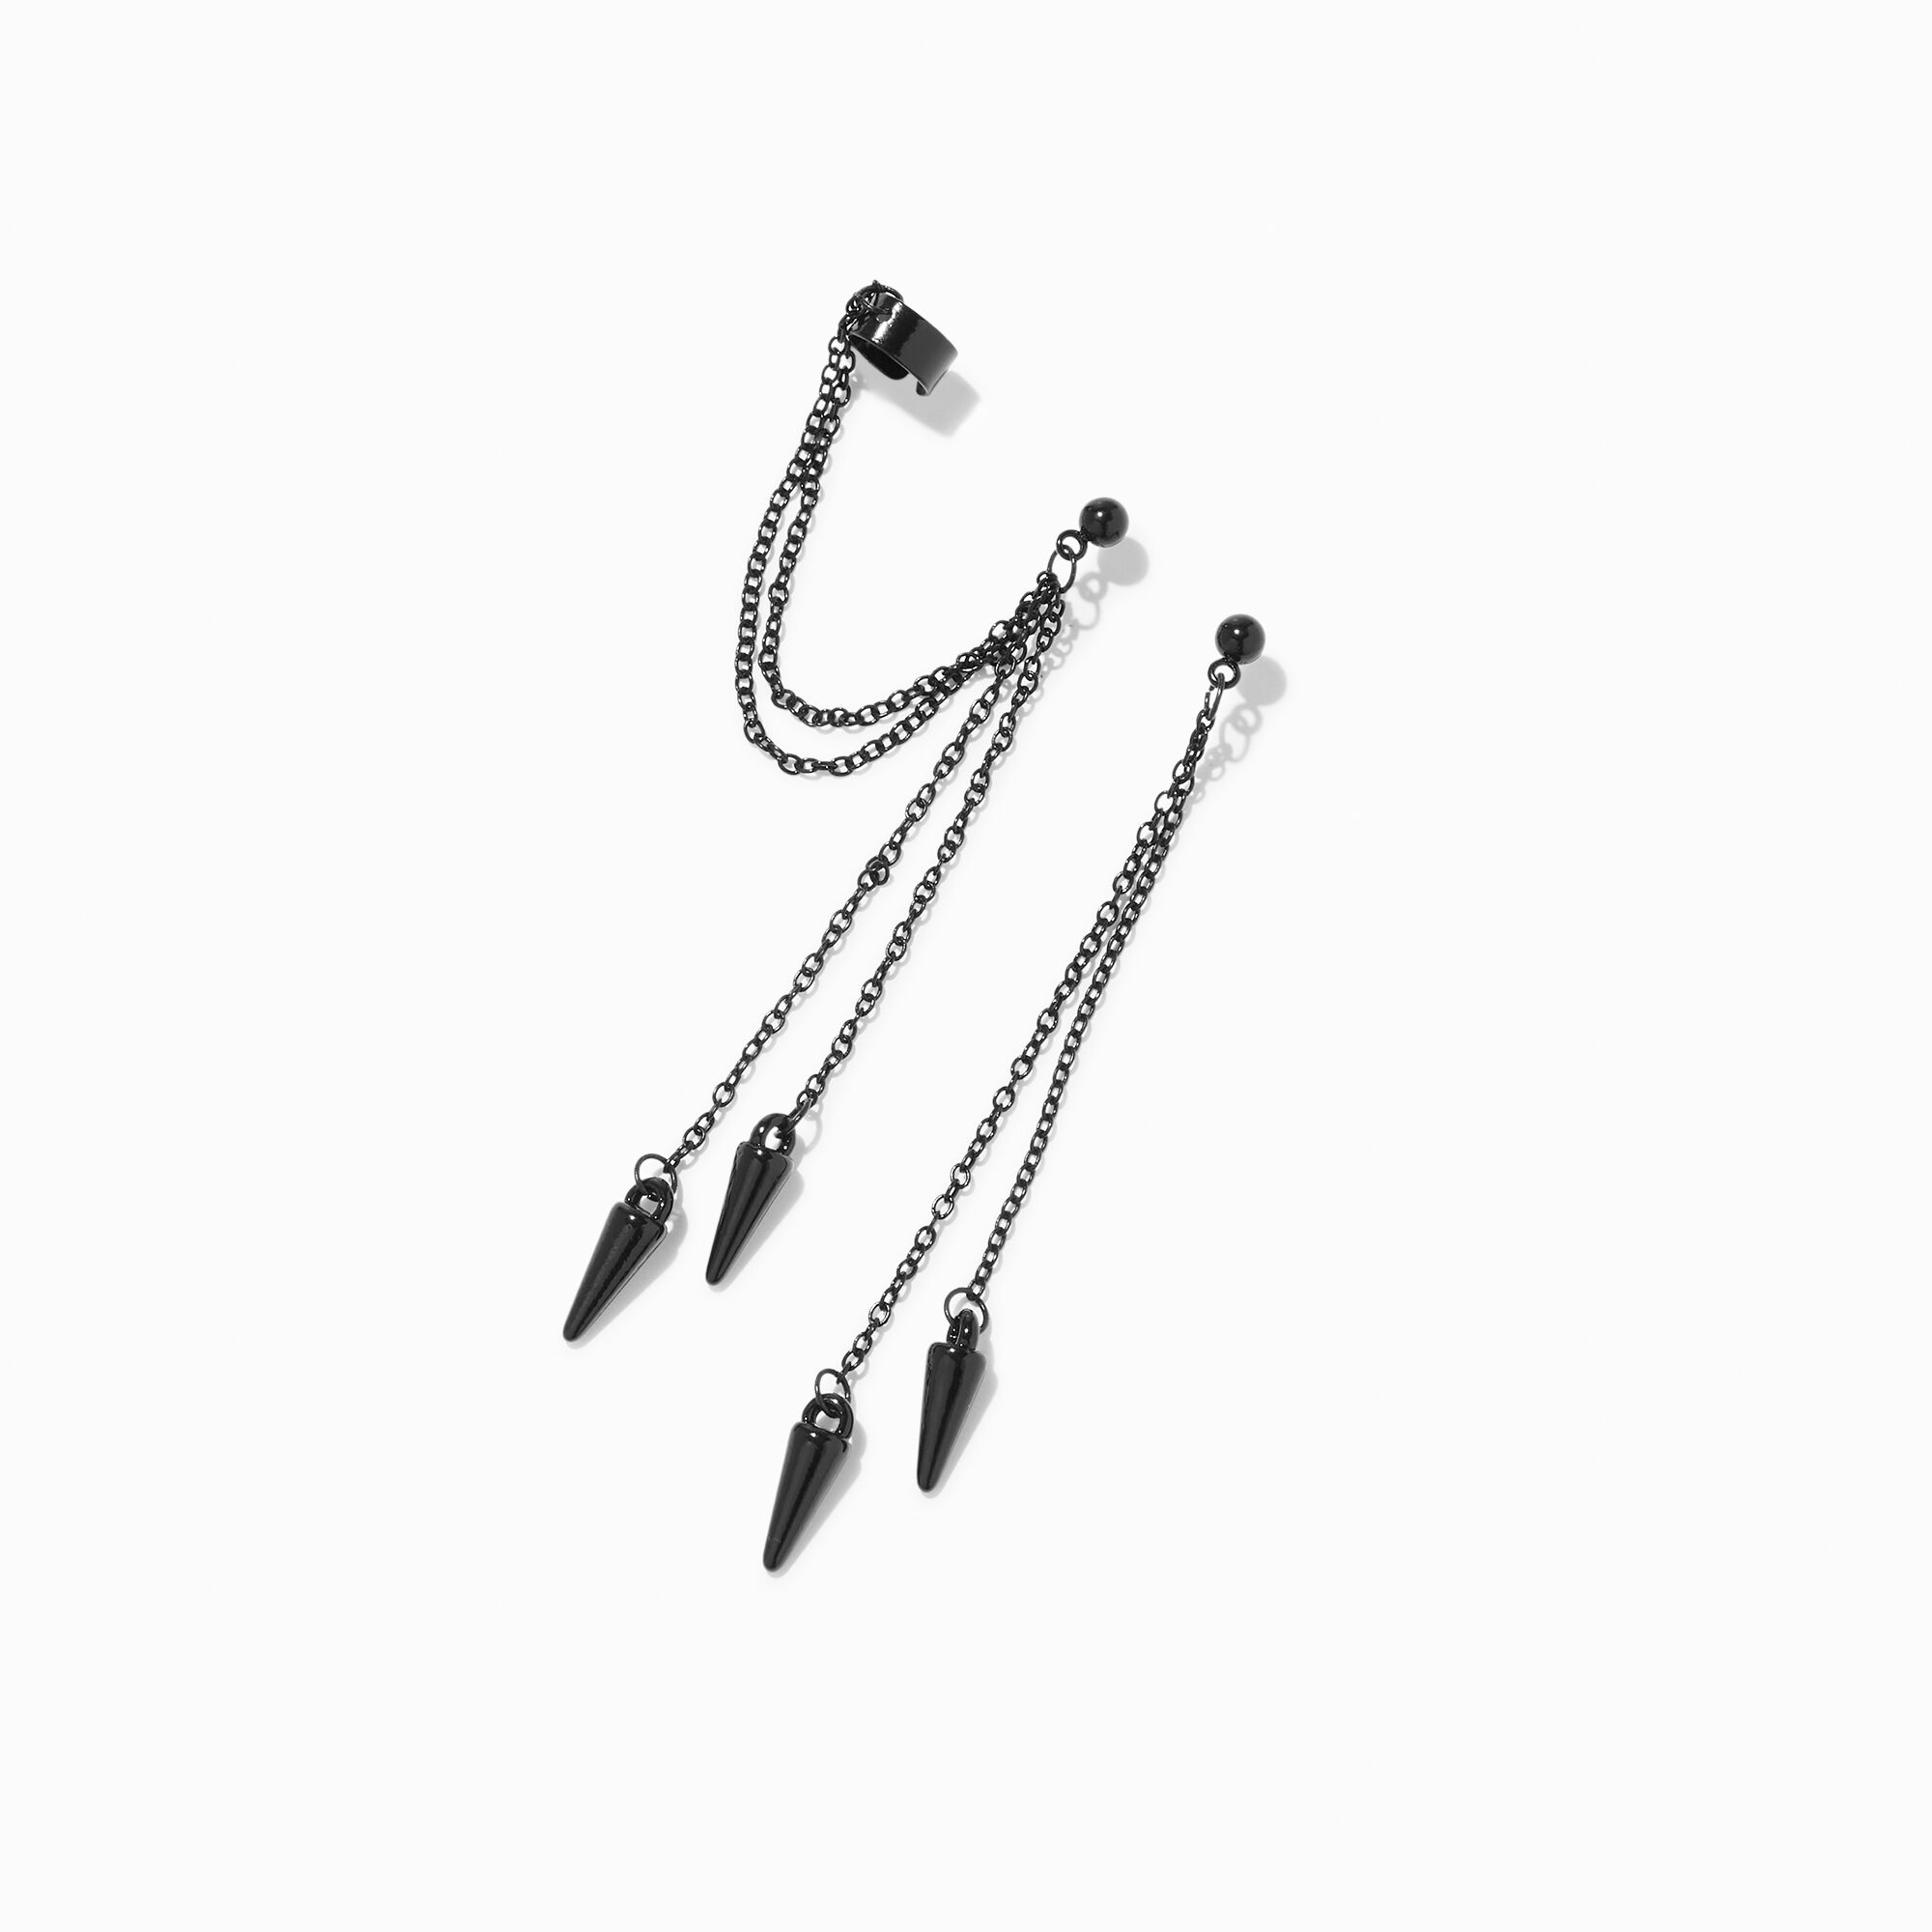 View Claires 3 Gothic Spike Linear Ear Cuff Drop Earrings Black information